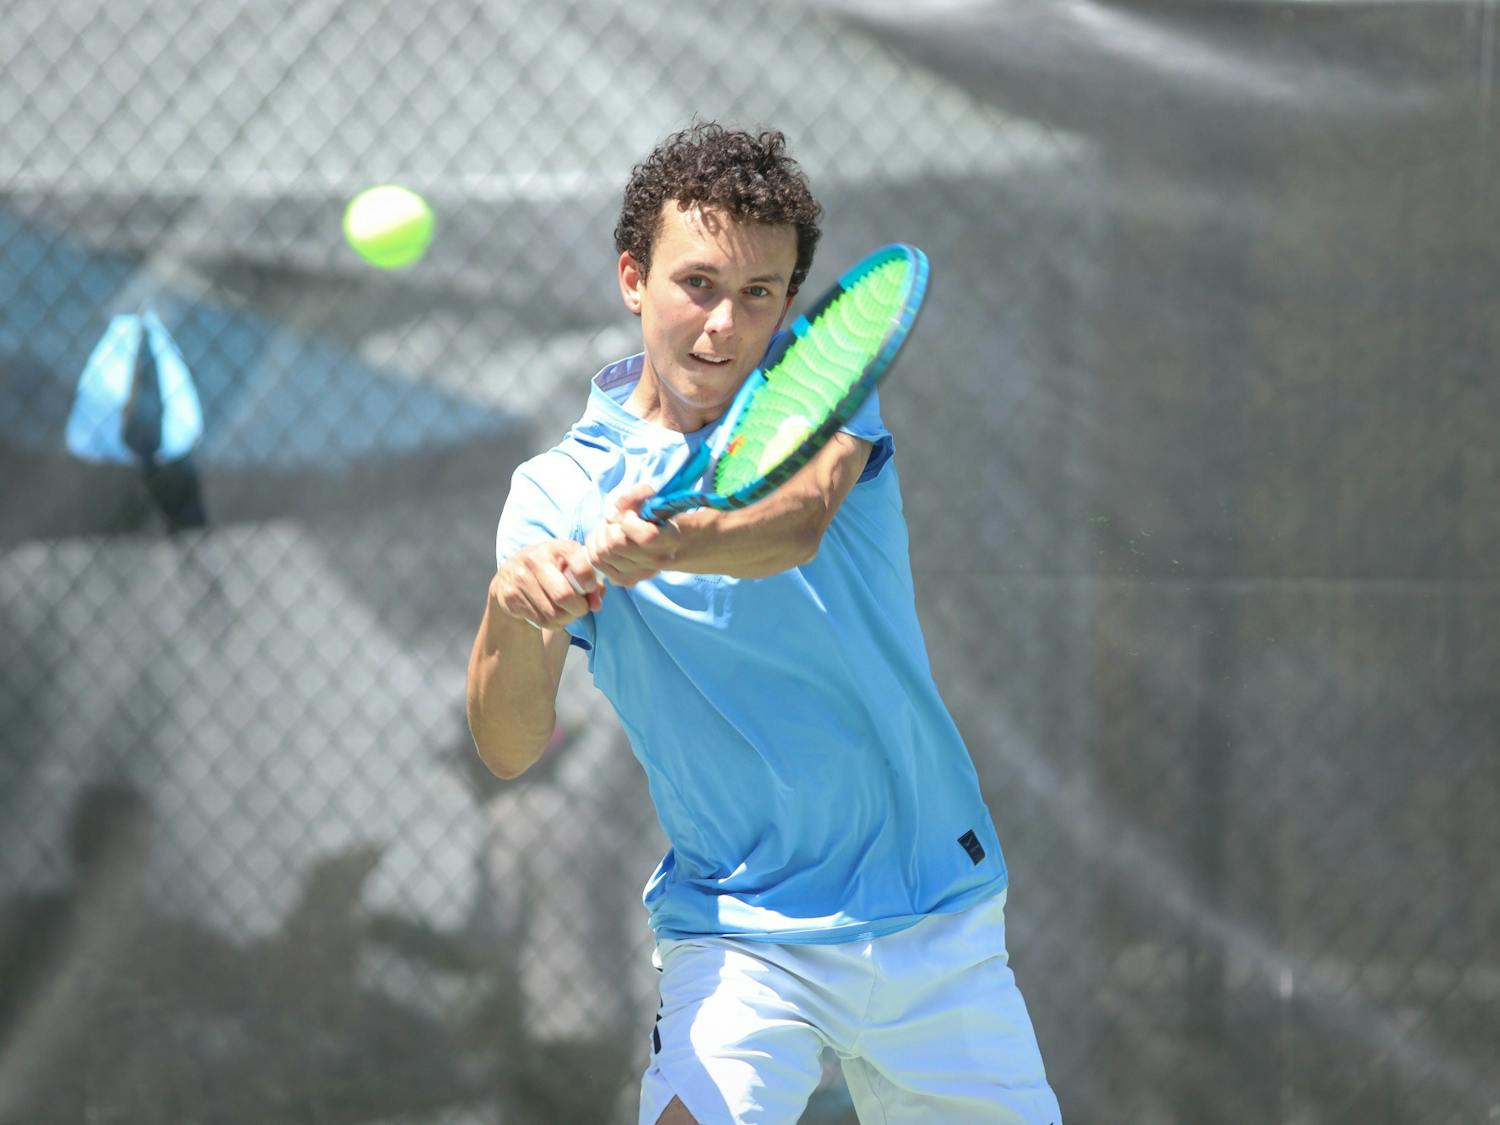 Sophomore Peter Murphy returns a volley with a backhand swing during his singles match. UNC beat Georgia Tech 7-0 on Sunday, April 3, 2022.